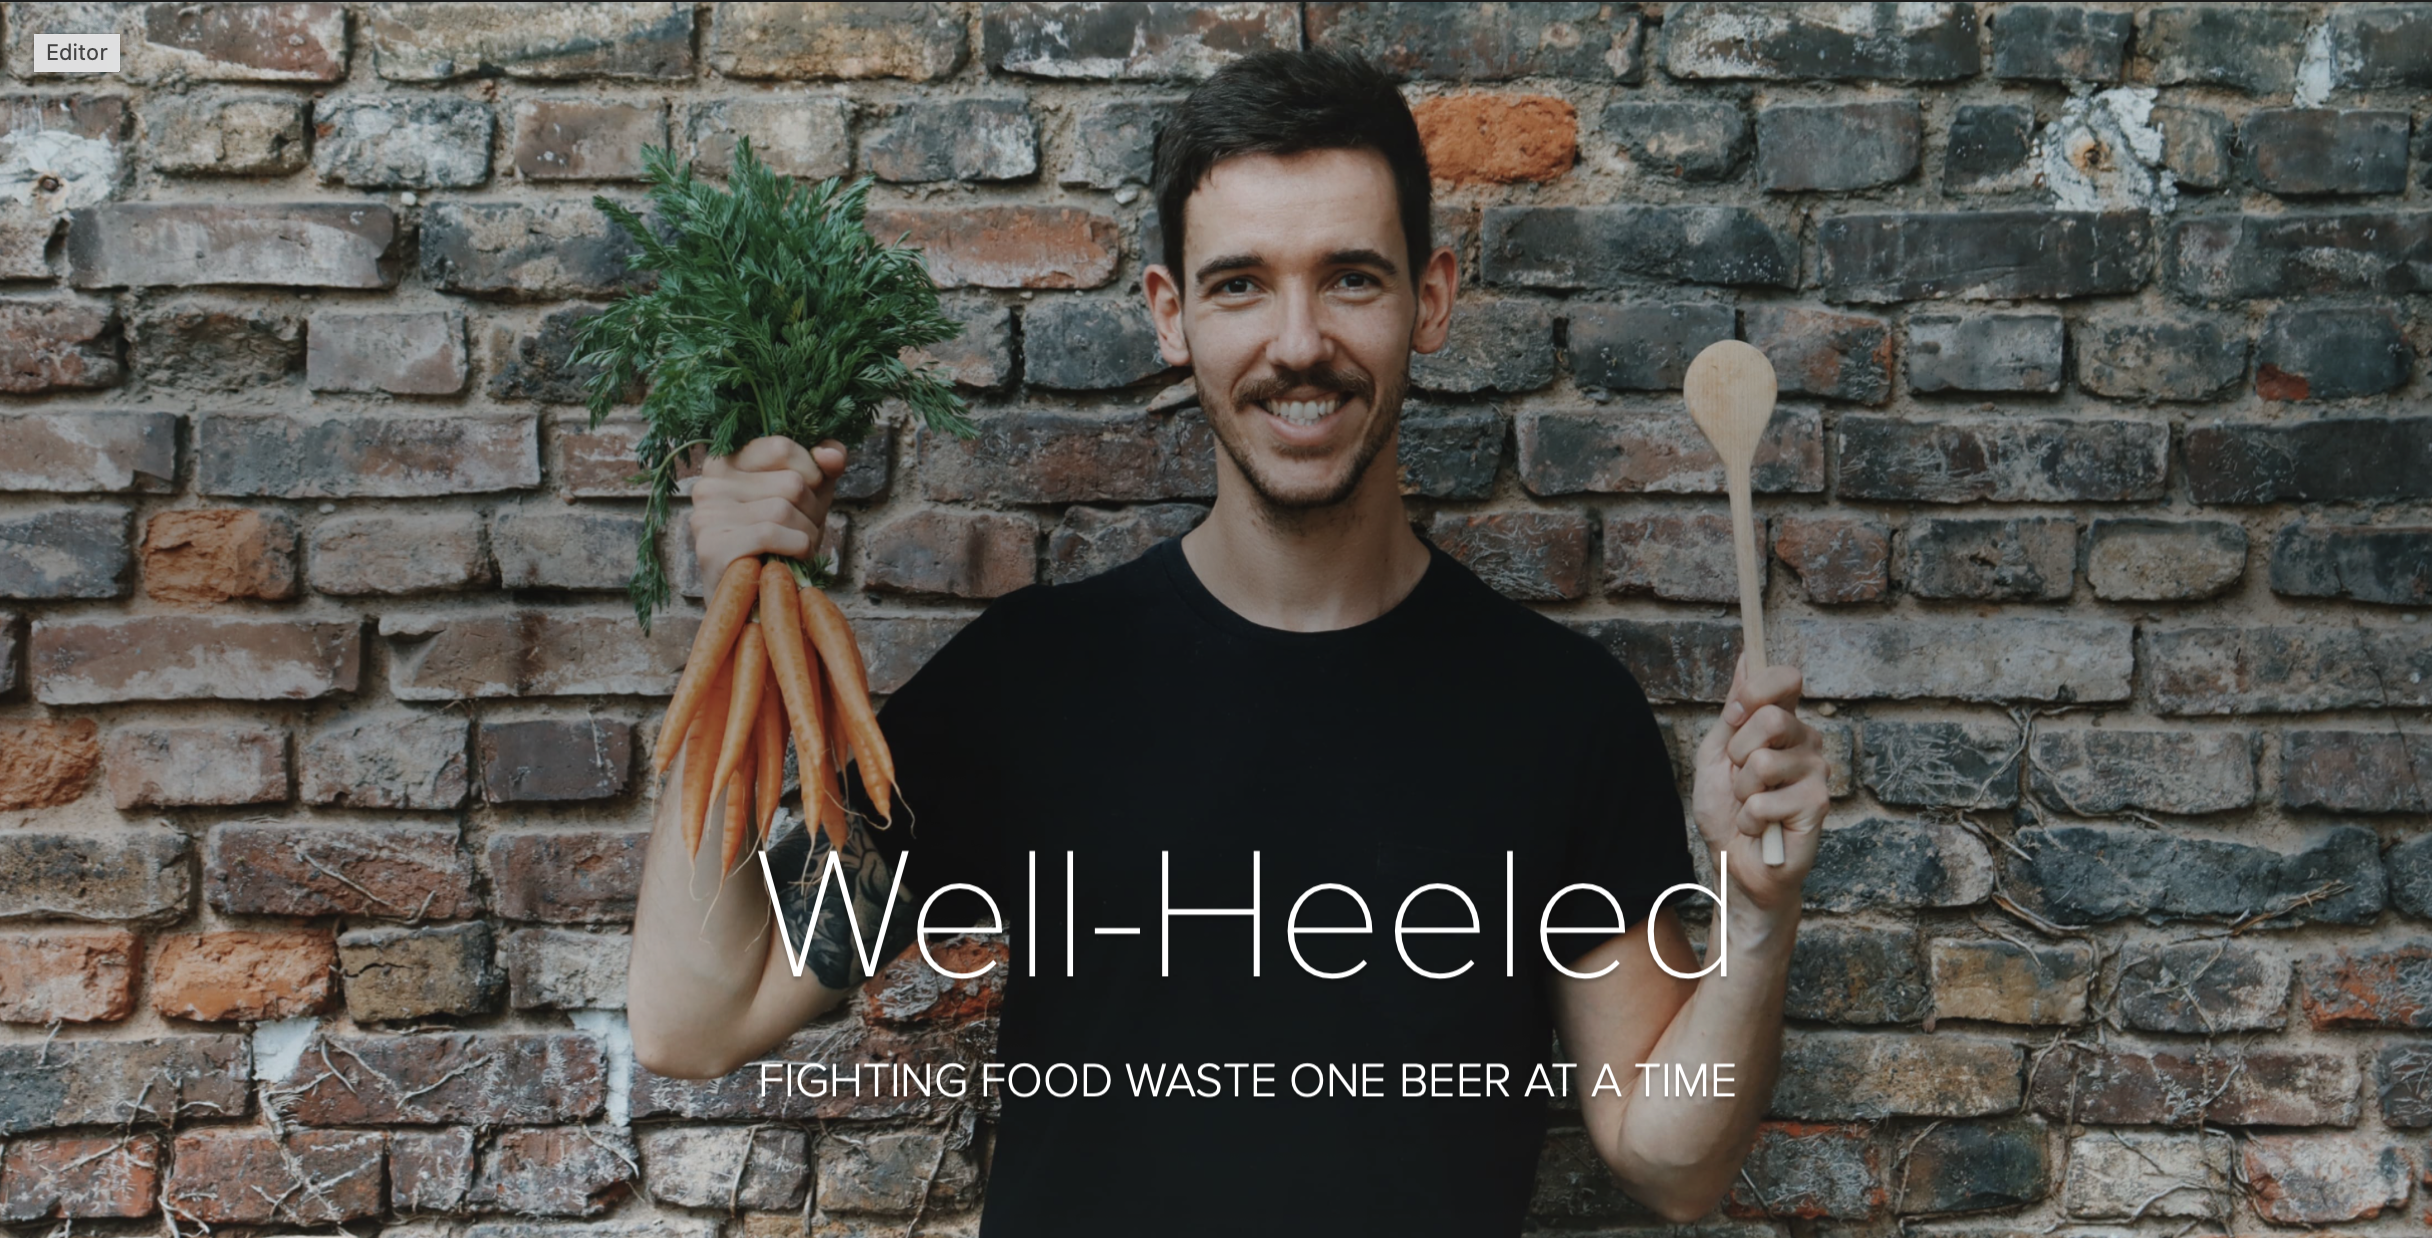 Daniel Anthes holding a bunch of carrots and a wooden spoon in front of a stone wall. The title reads "Well-Heeled: Fighting food waste one beer at a time""